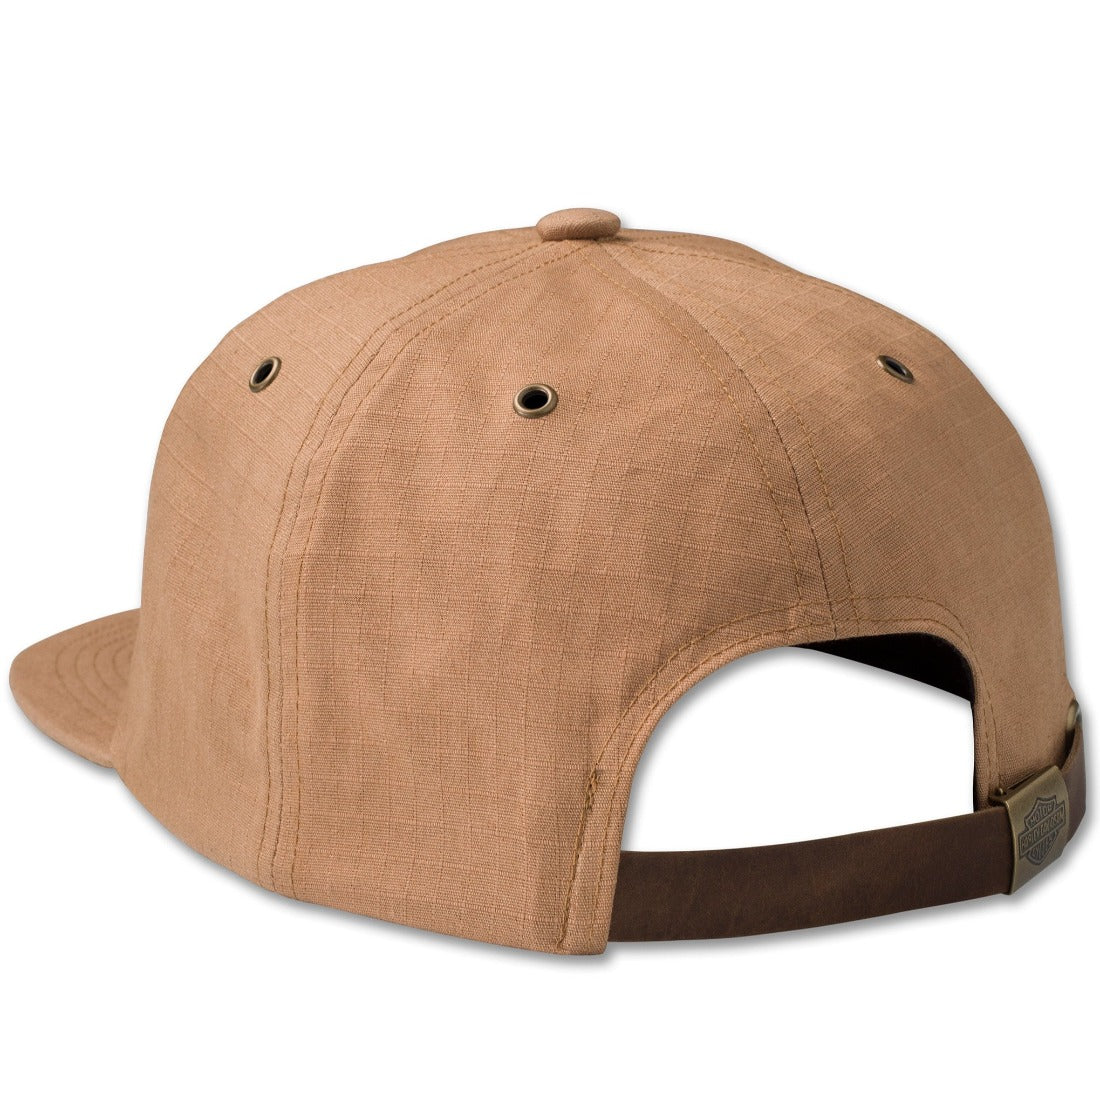 Florida Unstructured Hat Leather Patch Unstructured Style Hats for